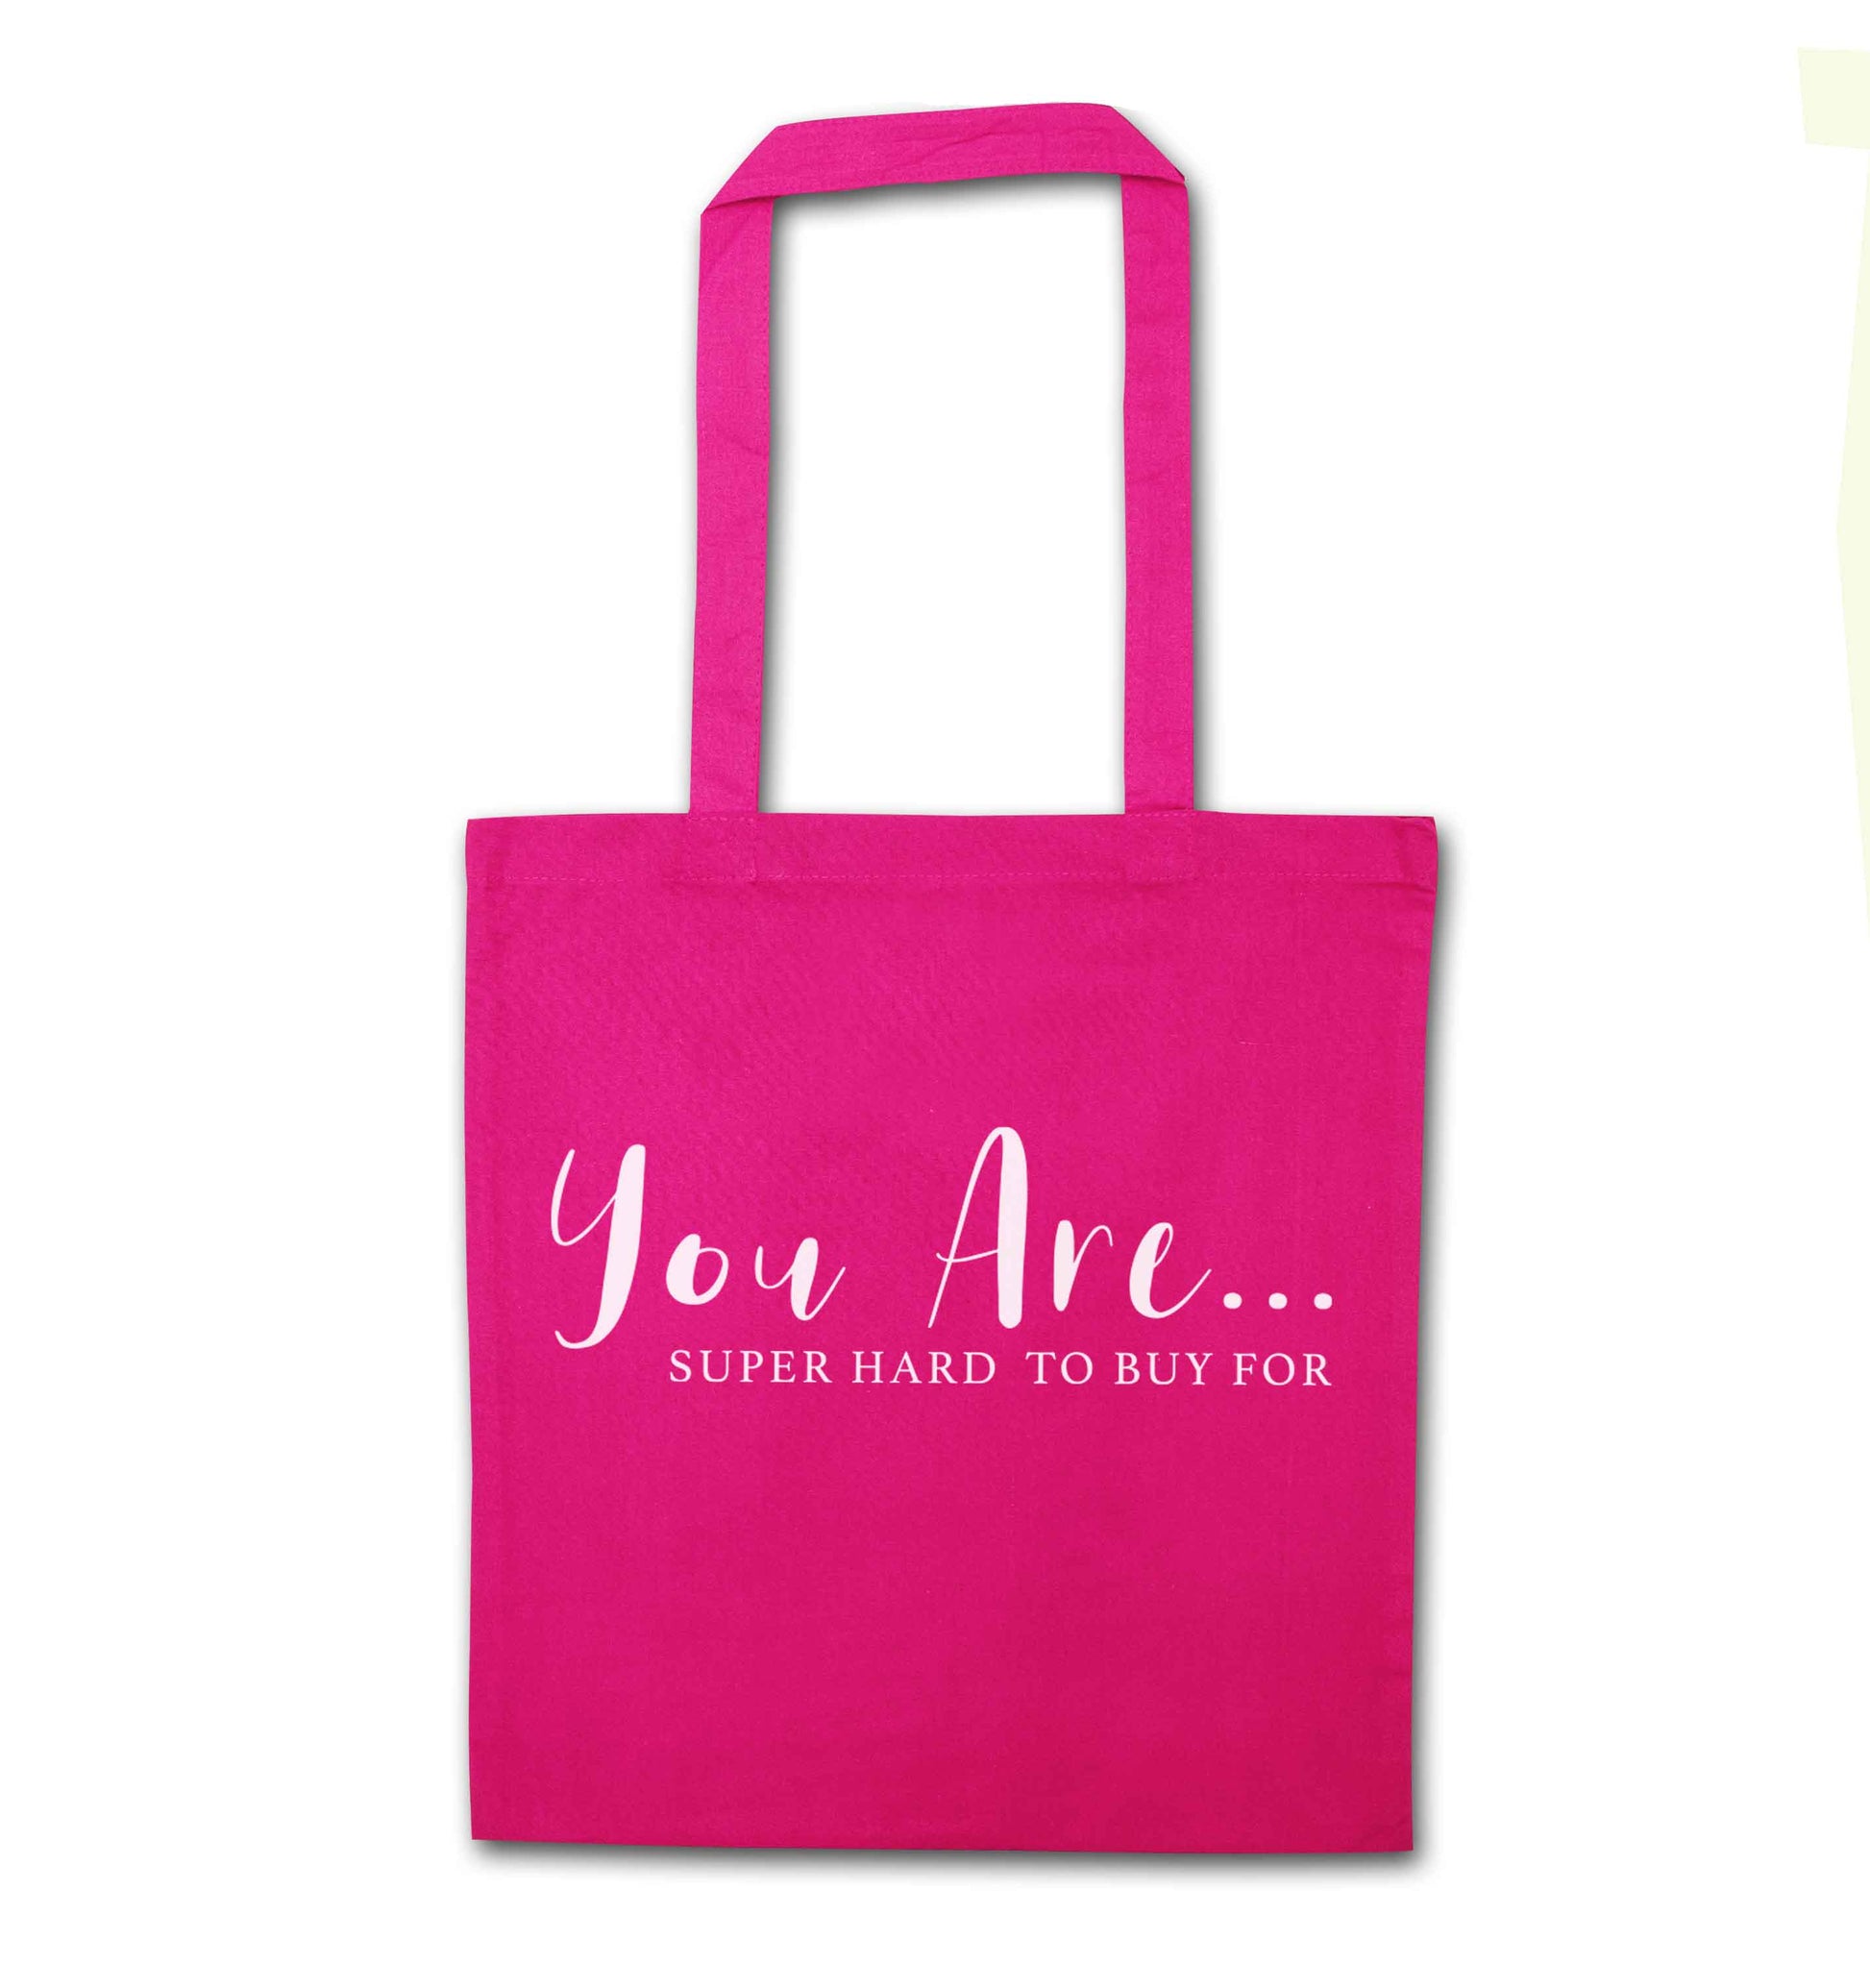 You are super hard to buy for pink tote bag